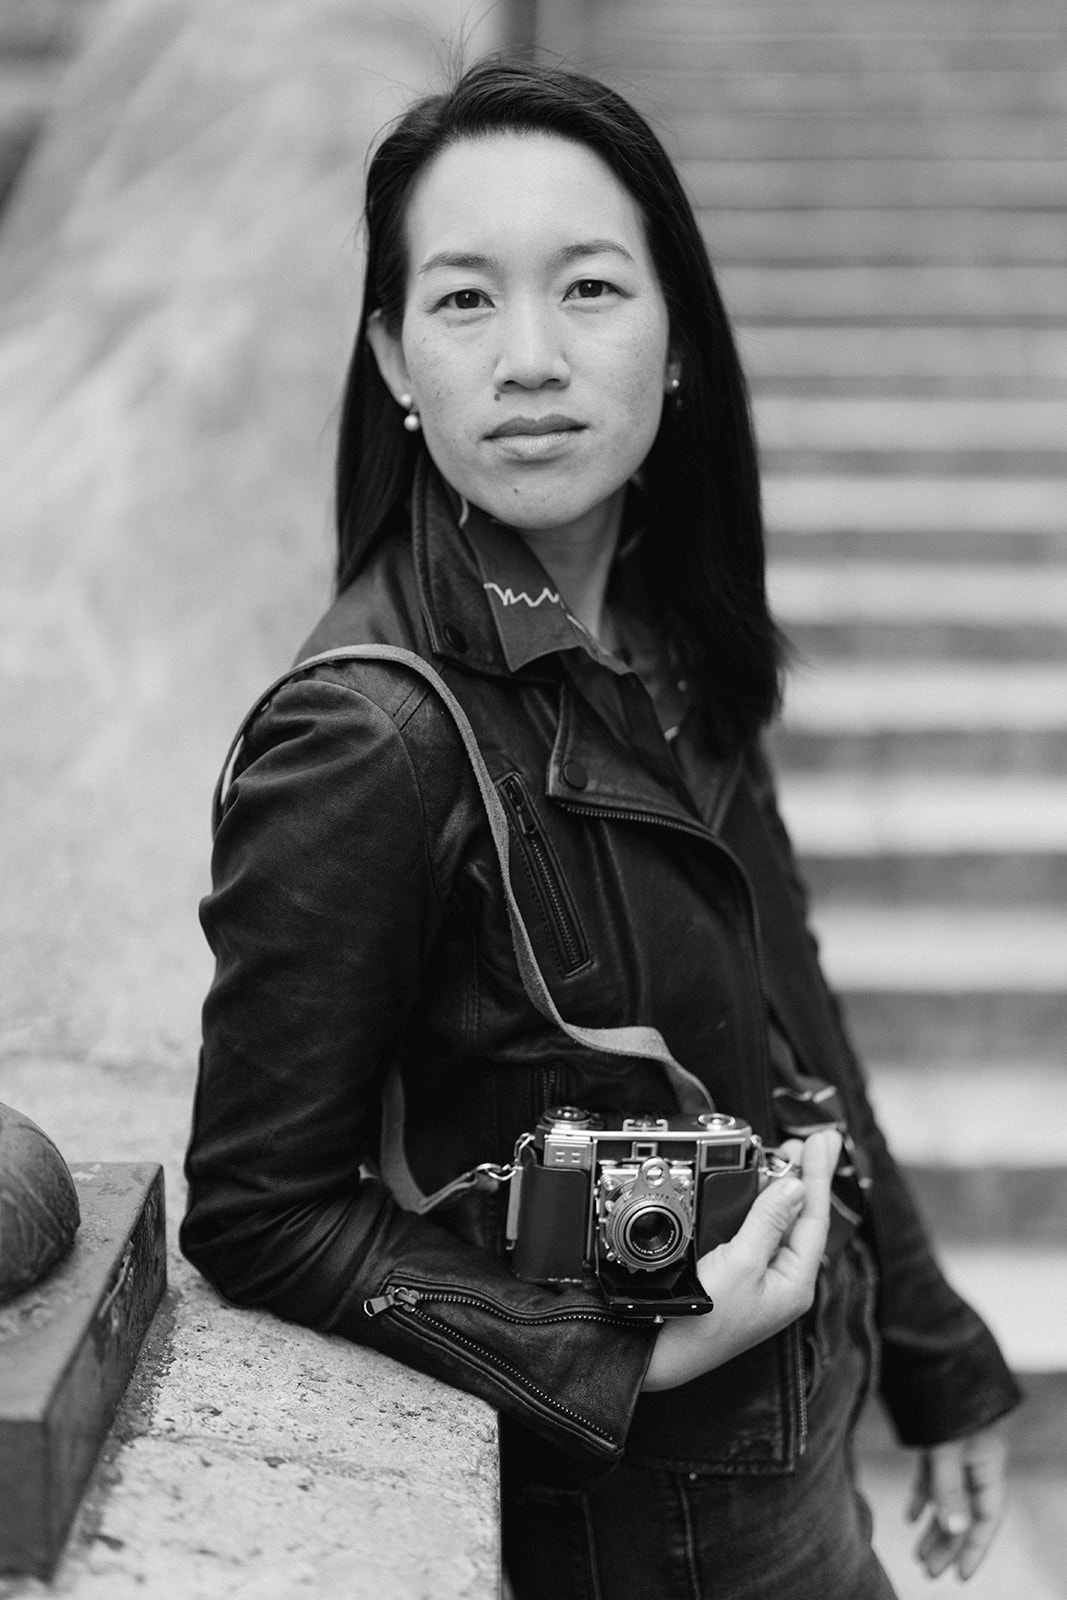 black and white photo of a woman with a camera in her hand leaning against a wall